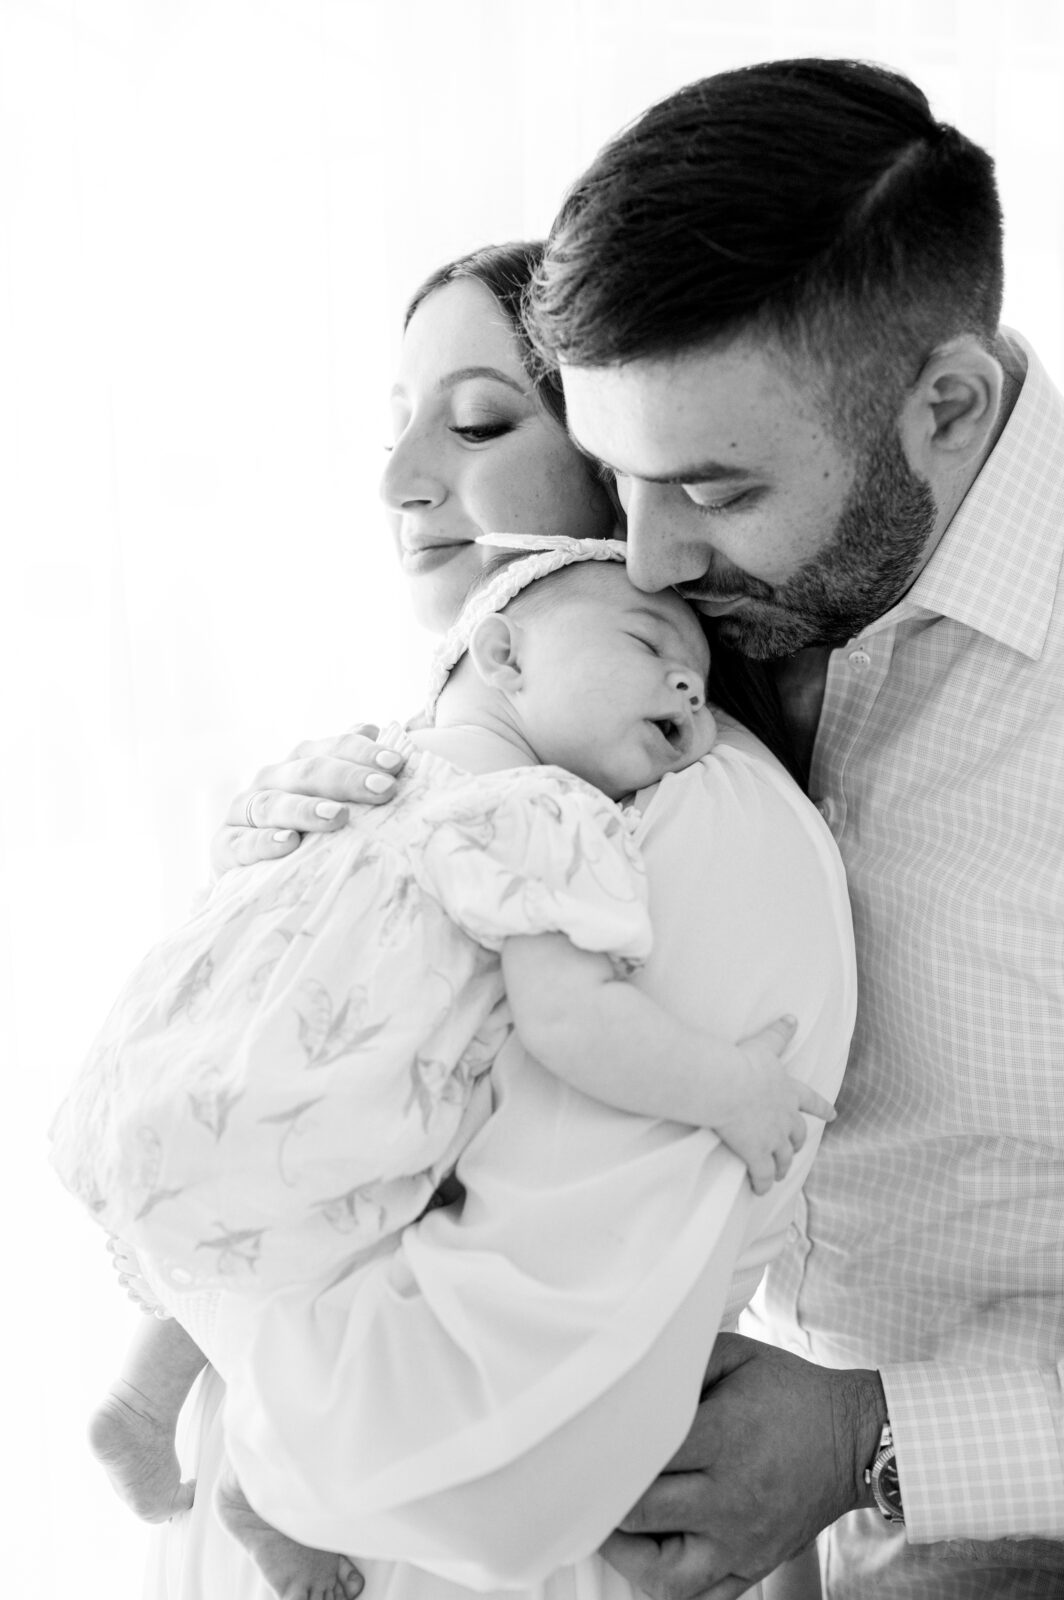 Black and white portrait of new parents with baby girl. Dad is kissing baby on the forehead